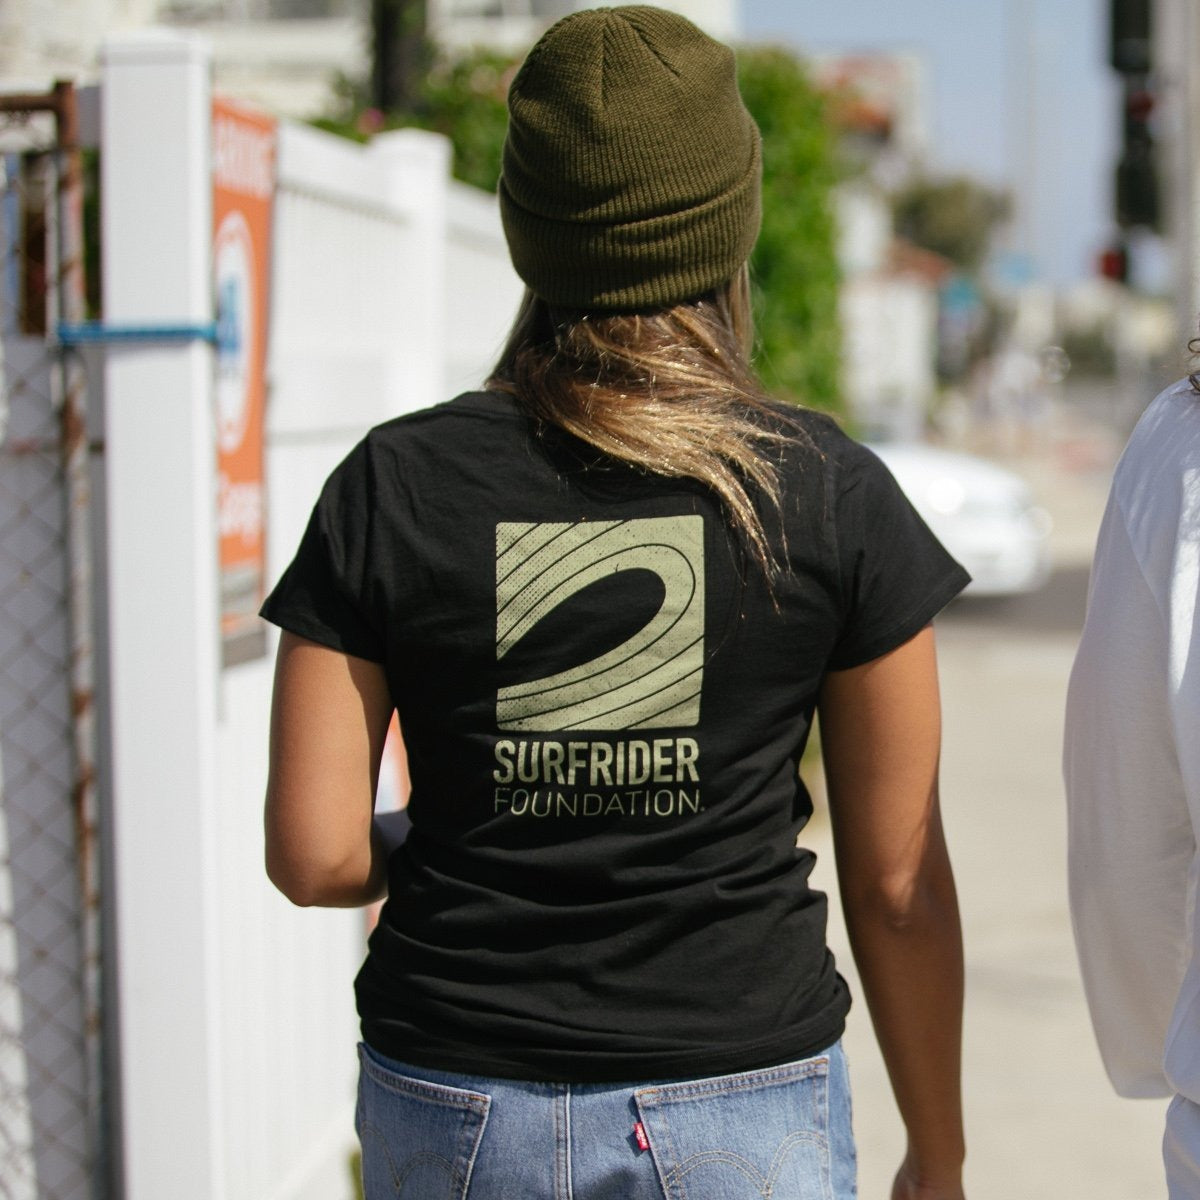 Back of tee on model shows off the Surfrider logo. 